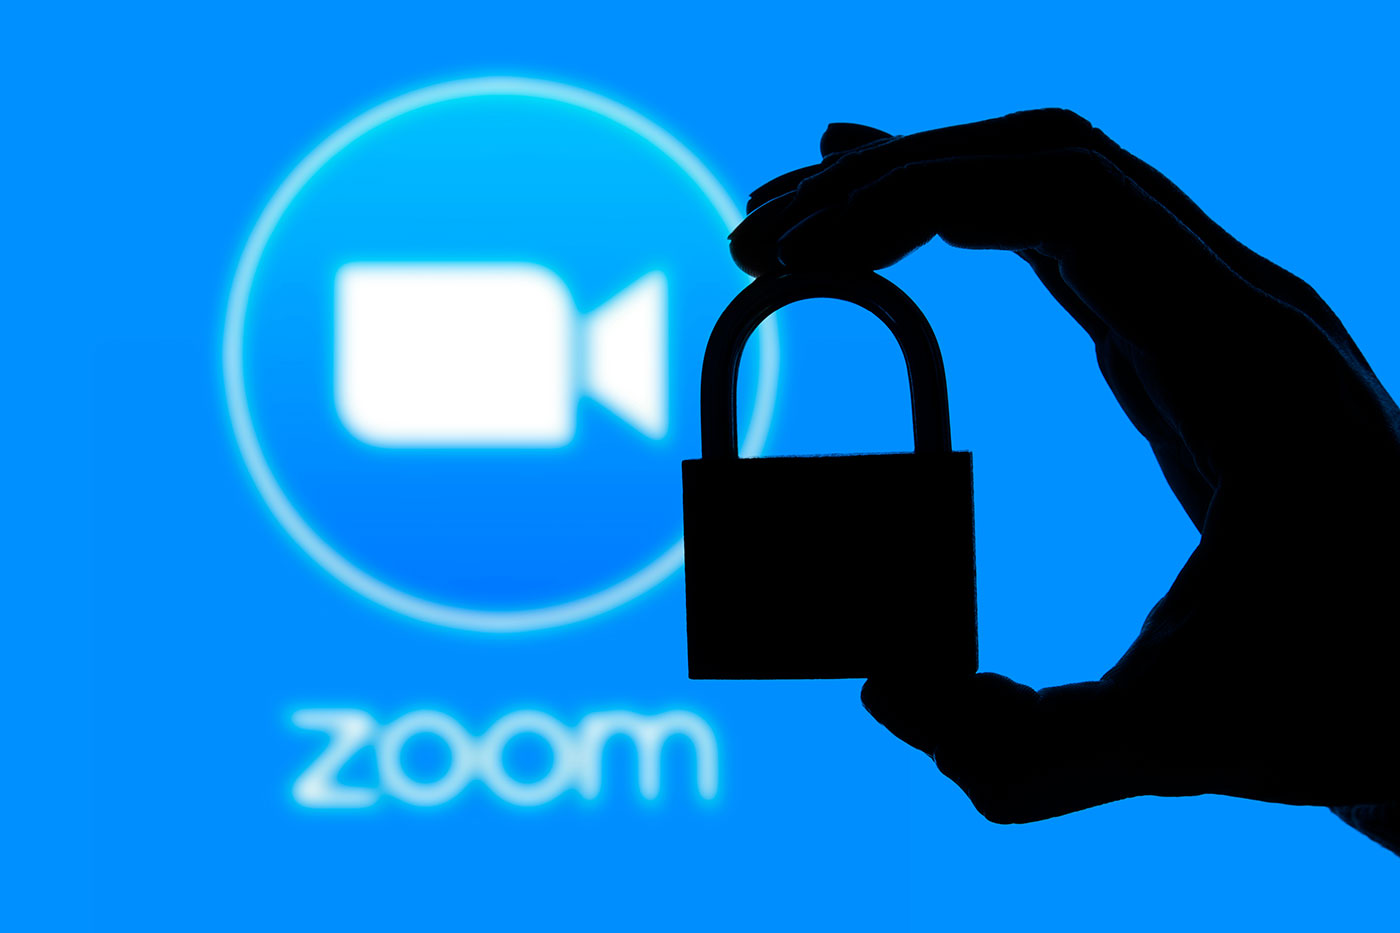 Zoom faces a privacy and security backlash as it surges…